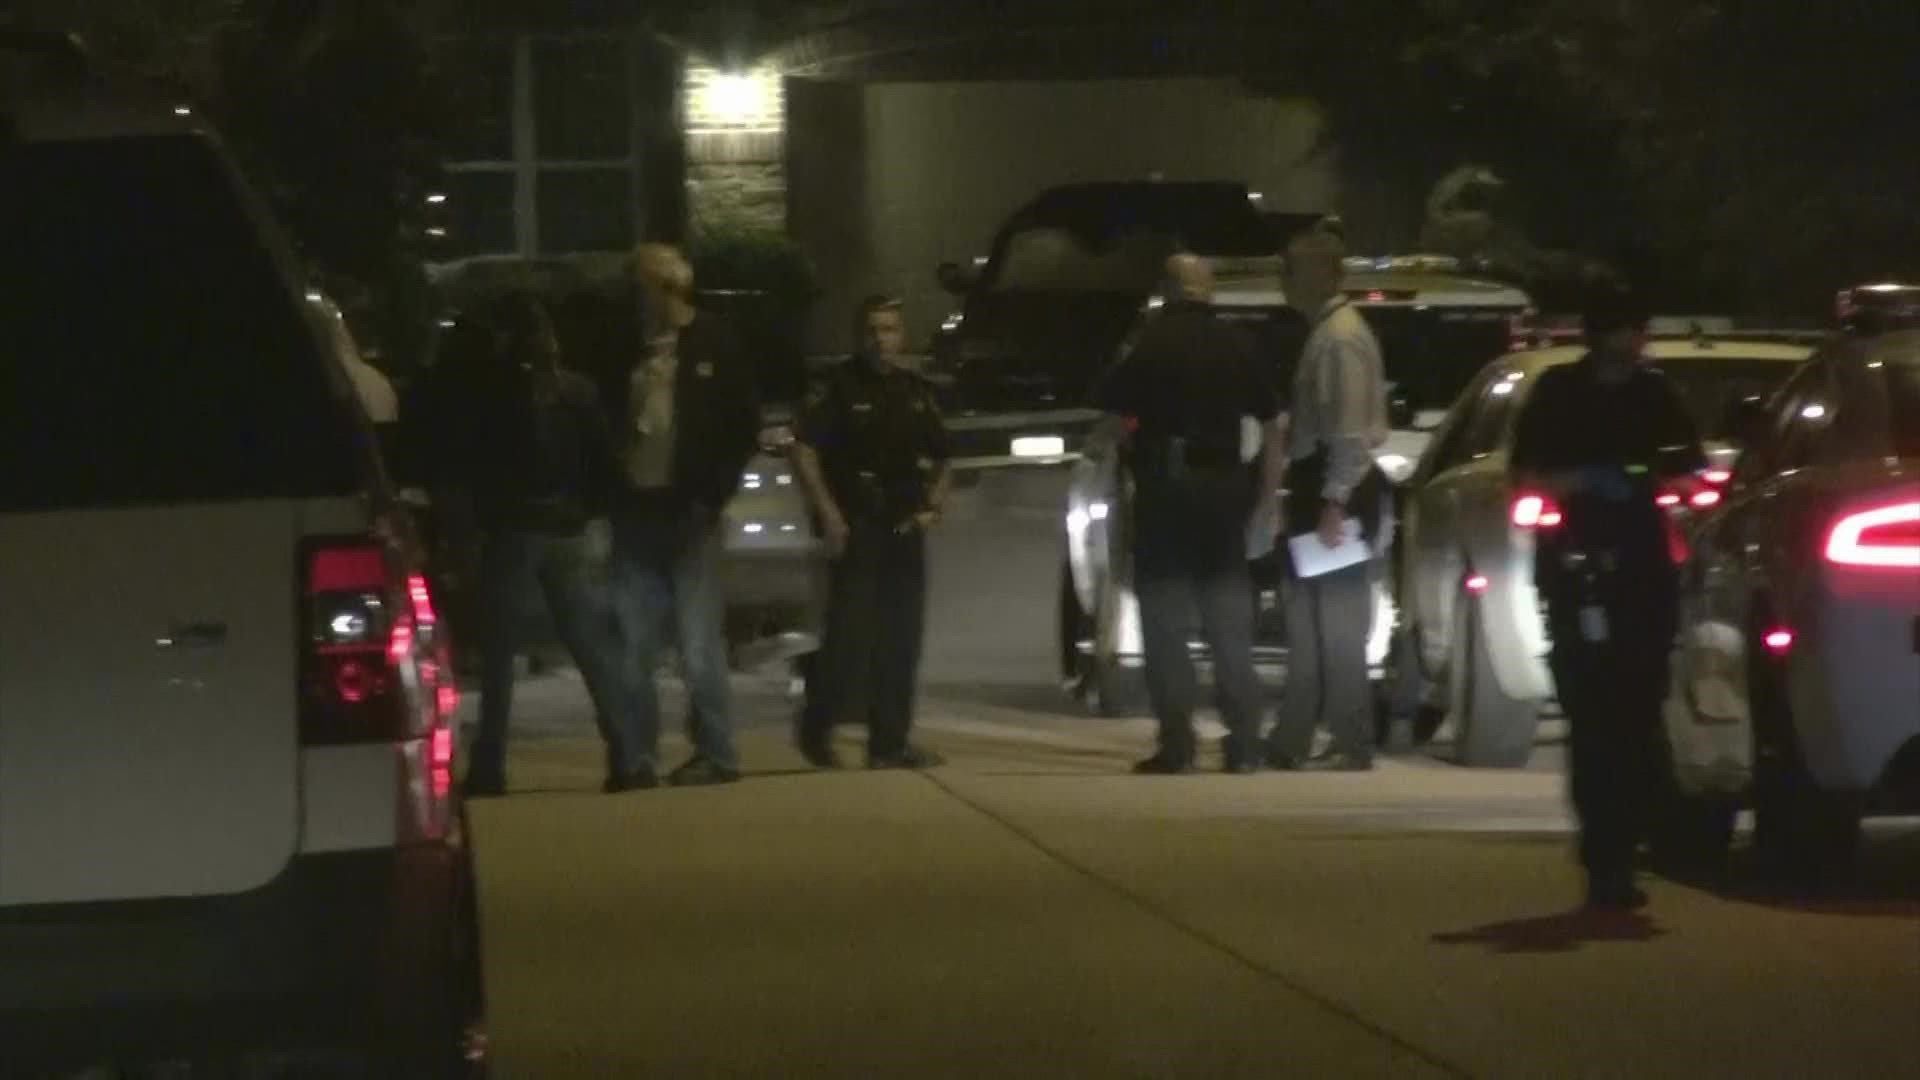 KHOU 11 reports on a deadly shooting northeast of Houston late Thursday